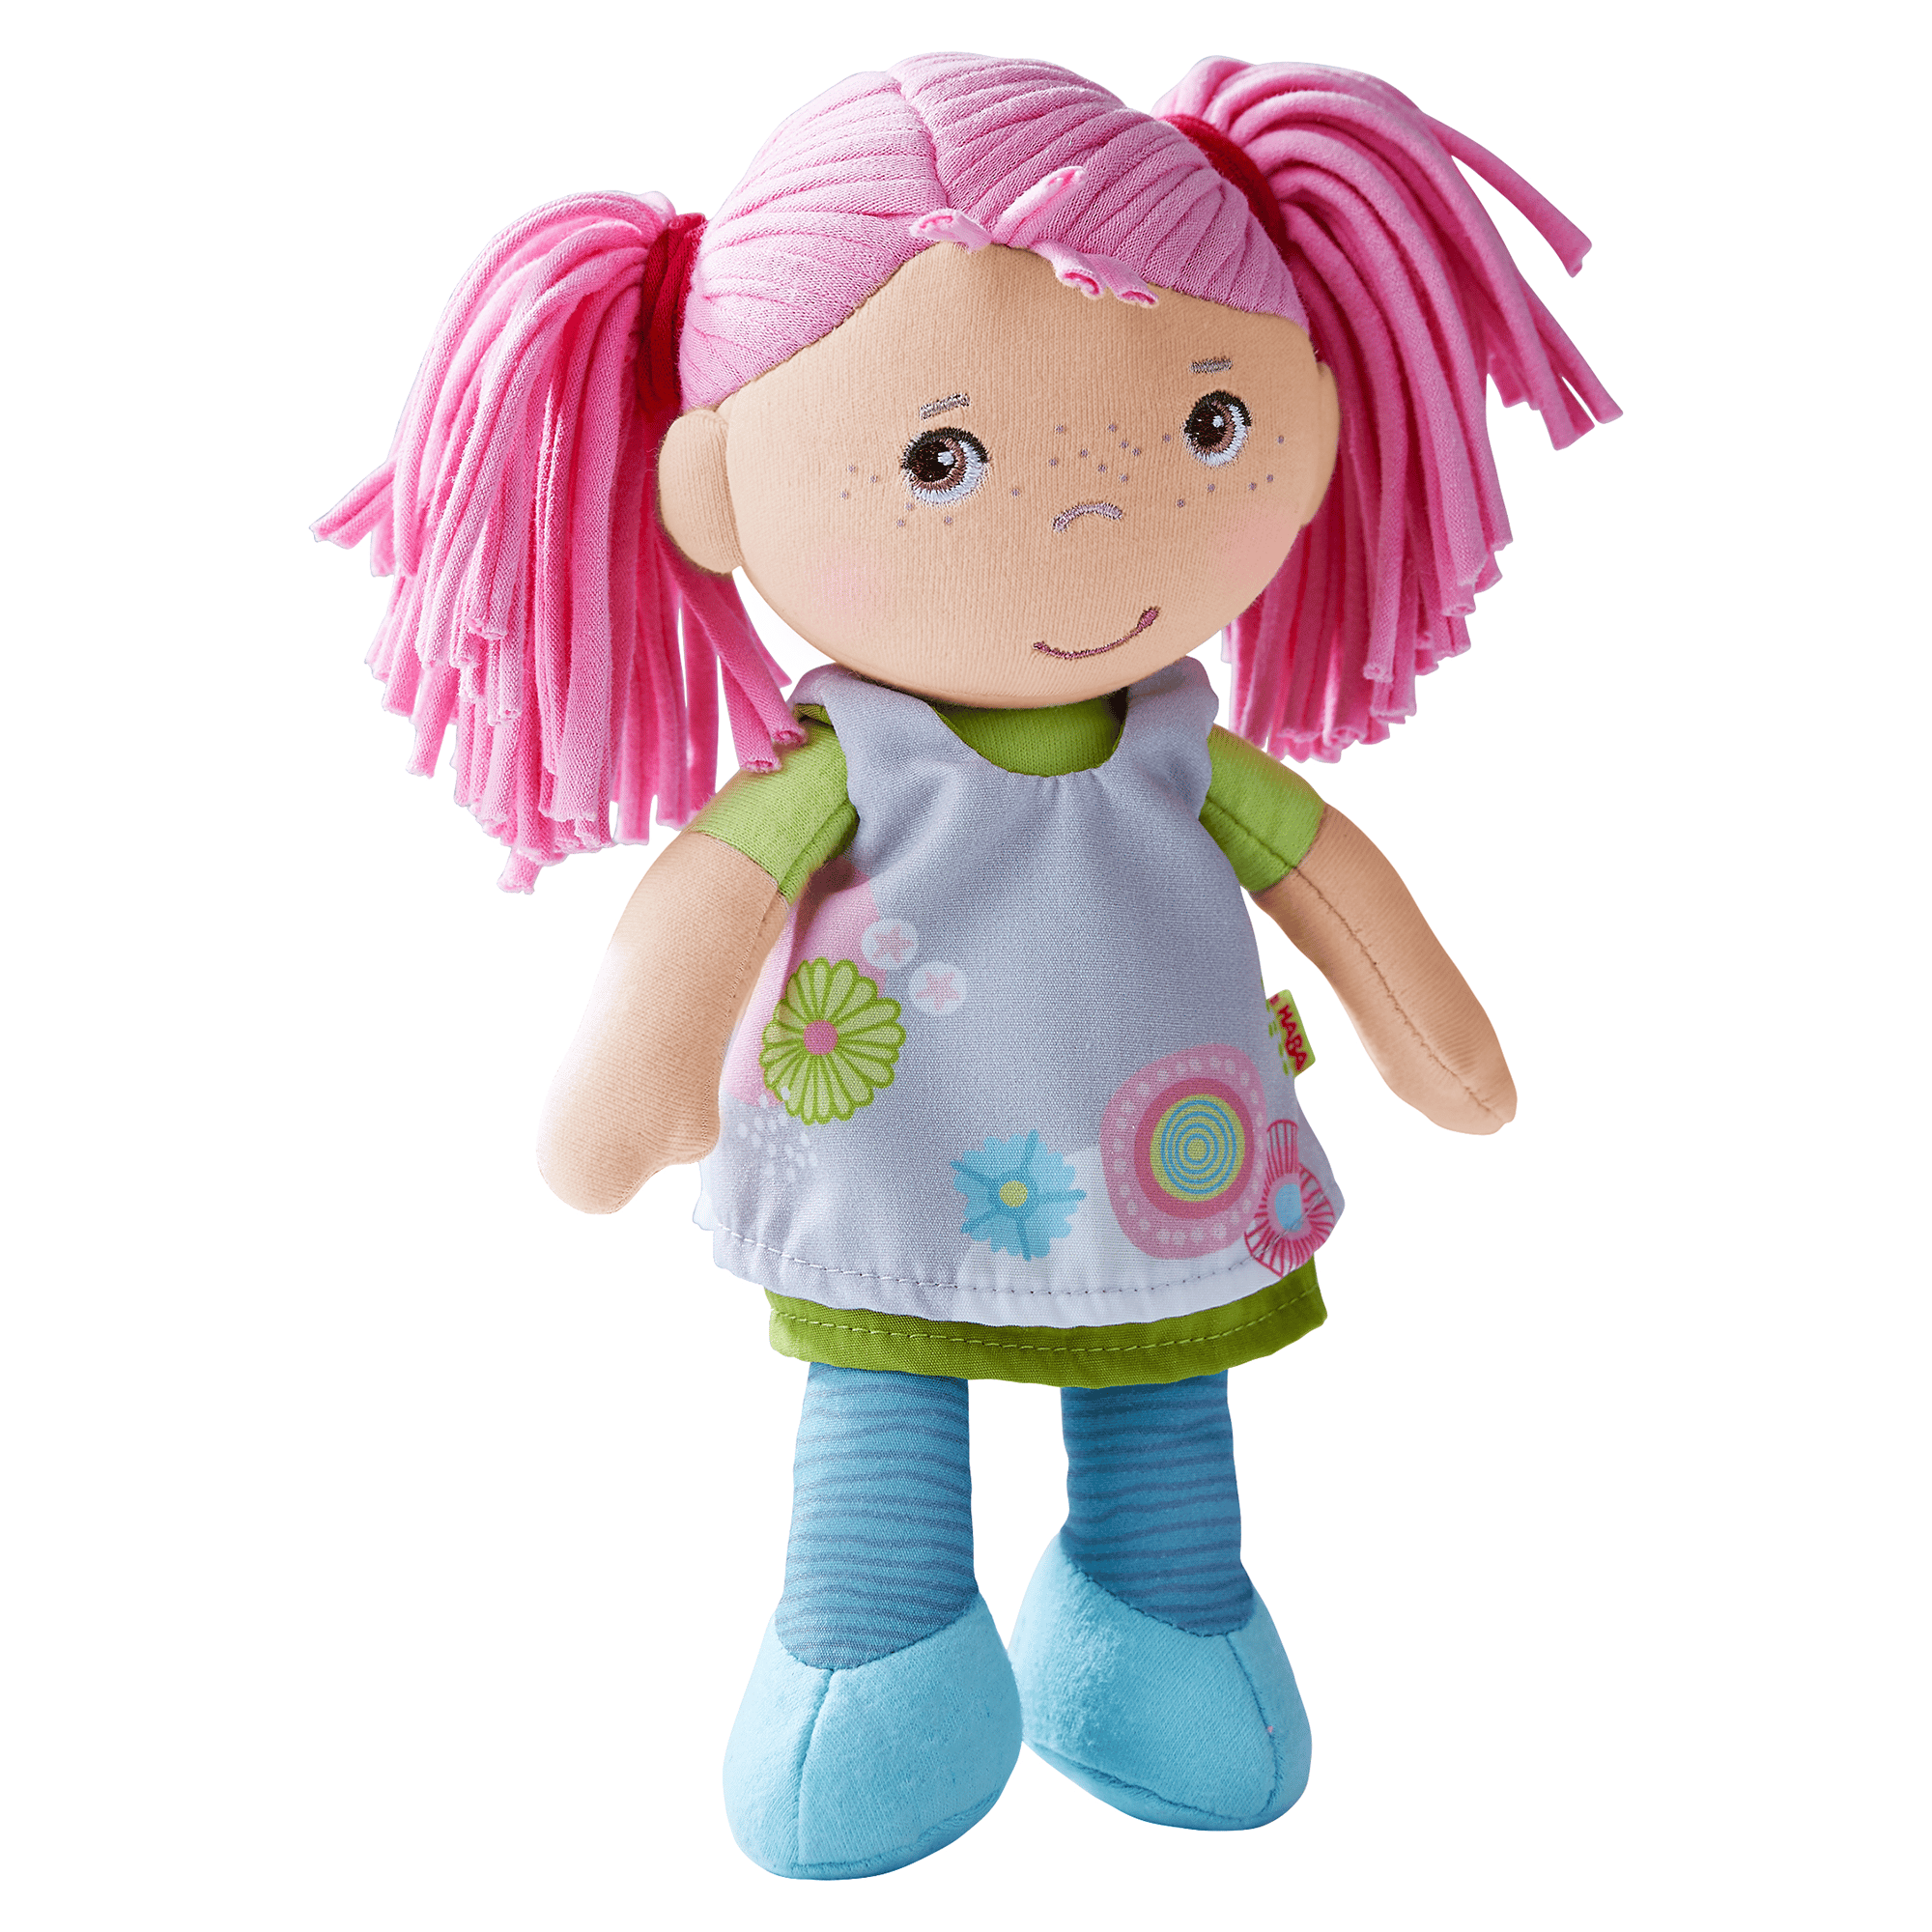 Puppe Beatrice HABA Pink 2000581225401 1